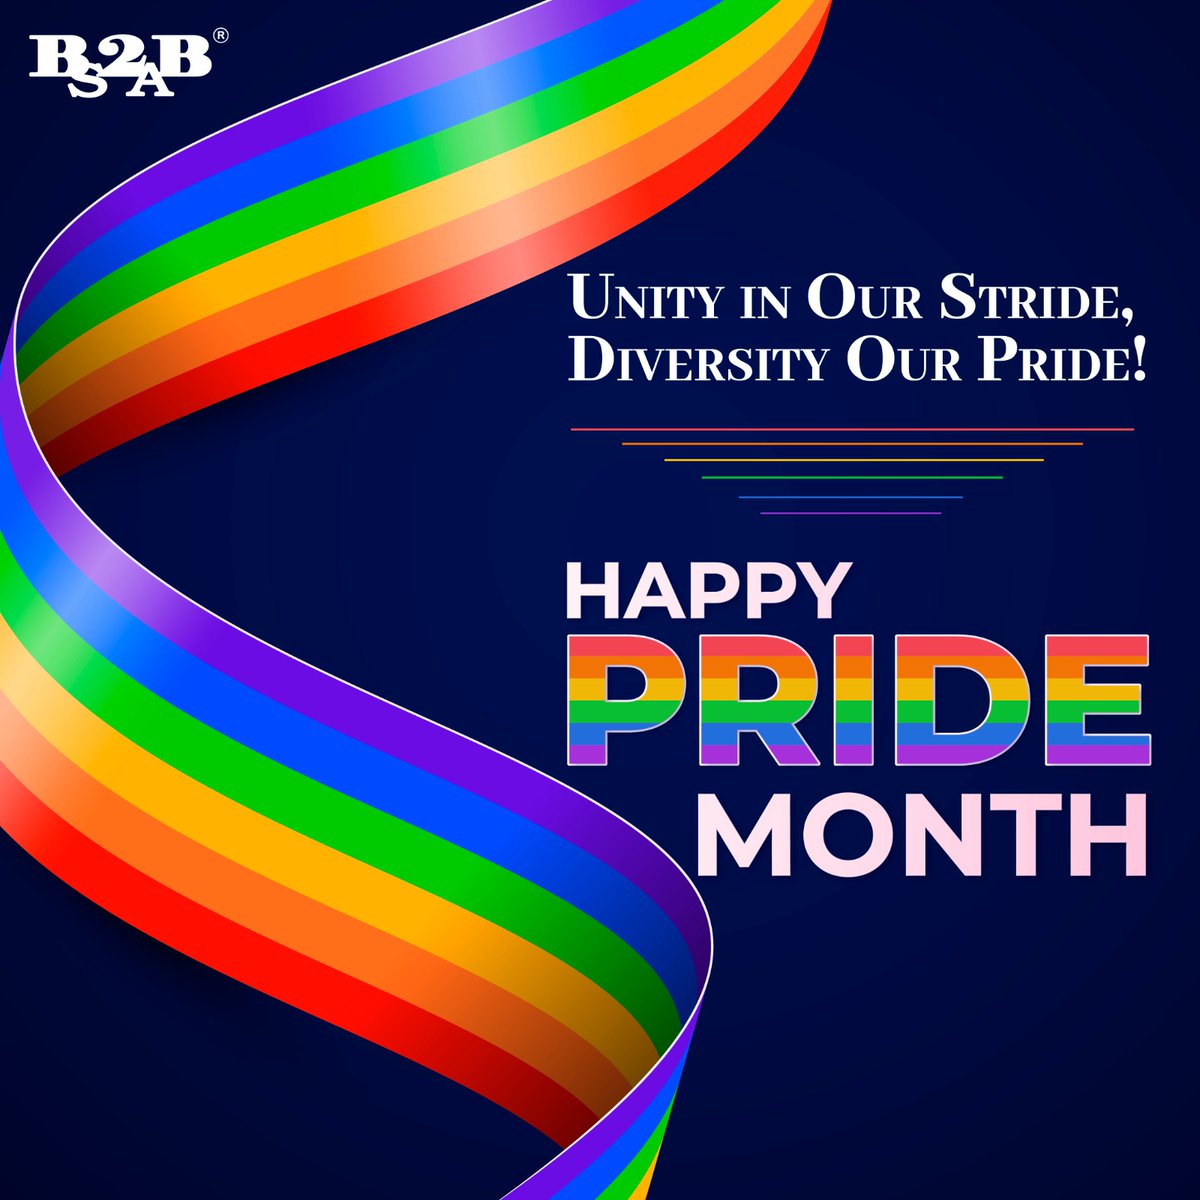 In this radiant month of #Pride, we celebrate the vibrant tapestry of #acceptance where every unique thread is marked.

At #B2BSalesArrow, we believe in the power of #inclusivity, where every soul is free to shine in their authentic brilliance.

Happy Pride Month! 🏳️‍🌈